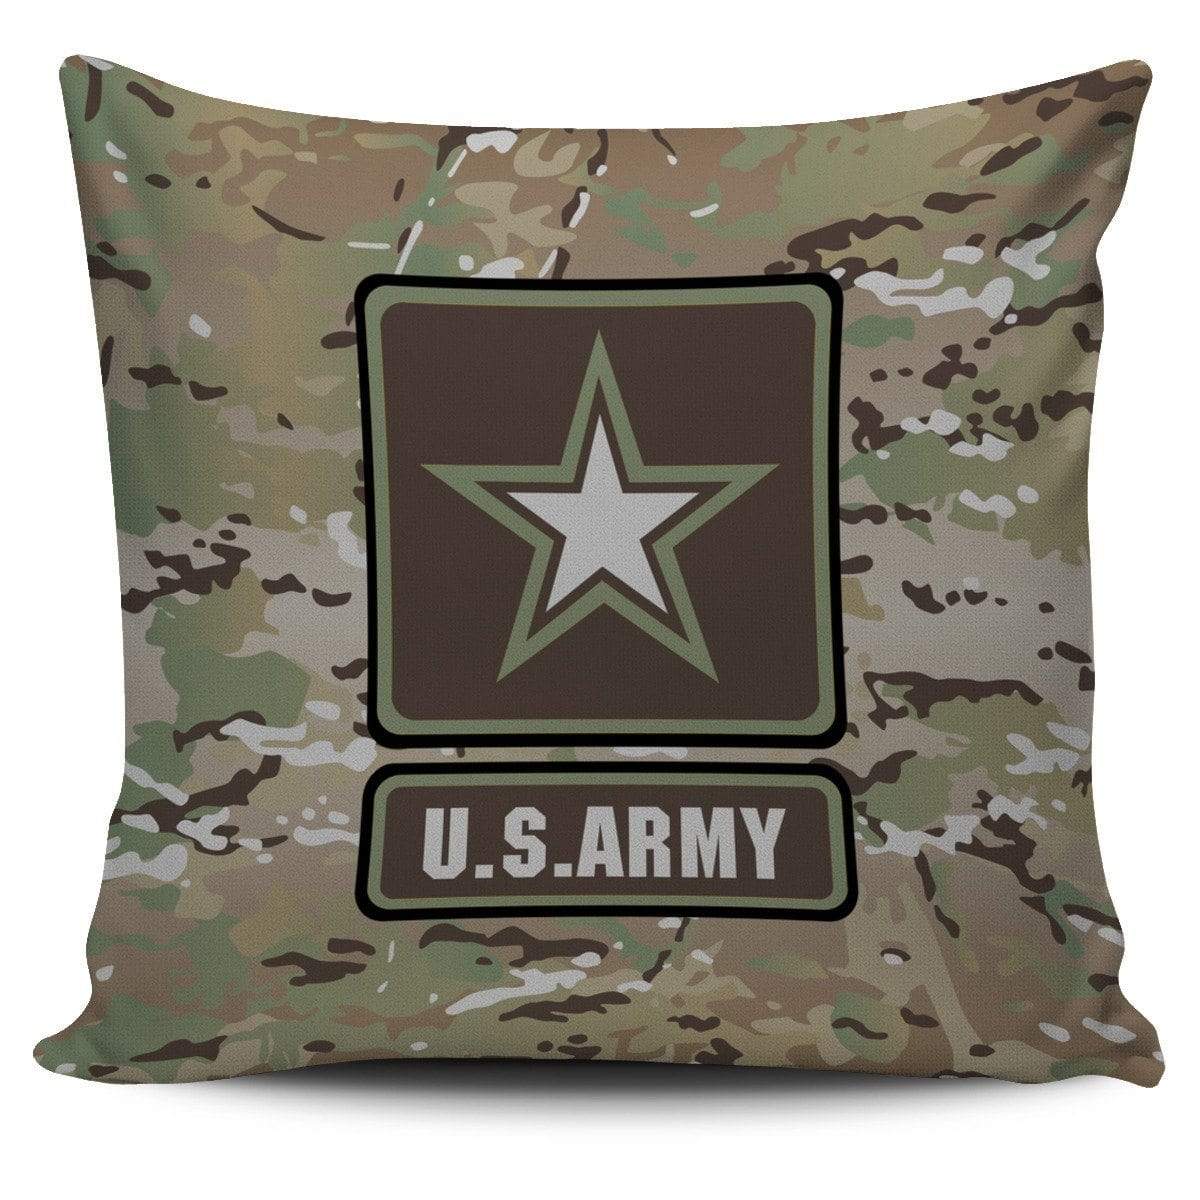 cushion cover United States Army Pillow Cover